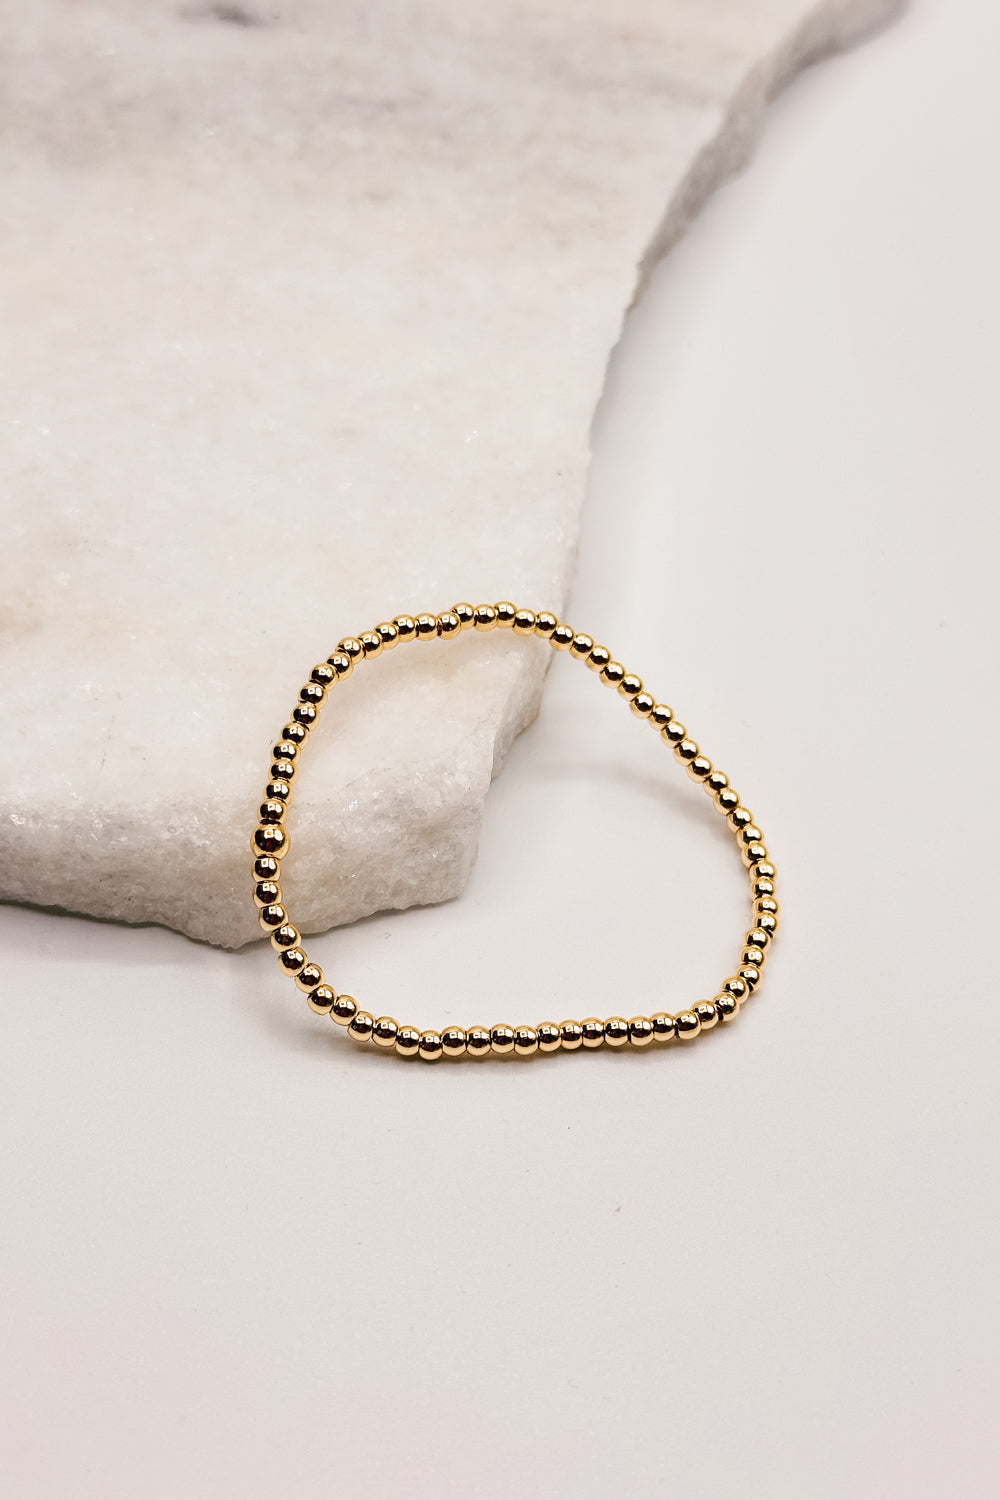 Image shows Aubrey Gold 4mm Beaded Water Resistant Bracelet against a white marble background.